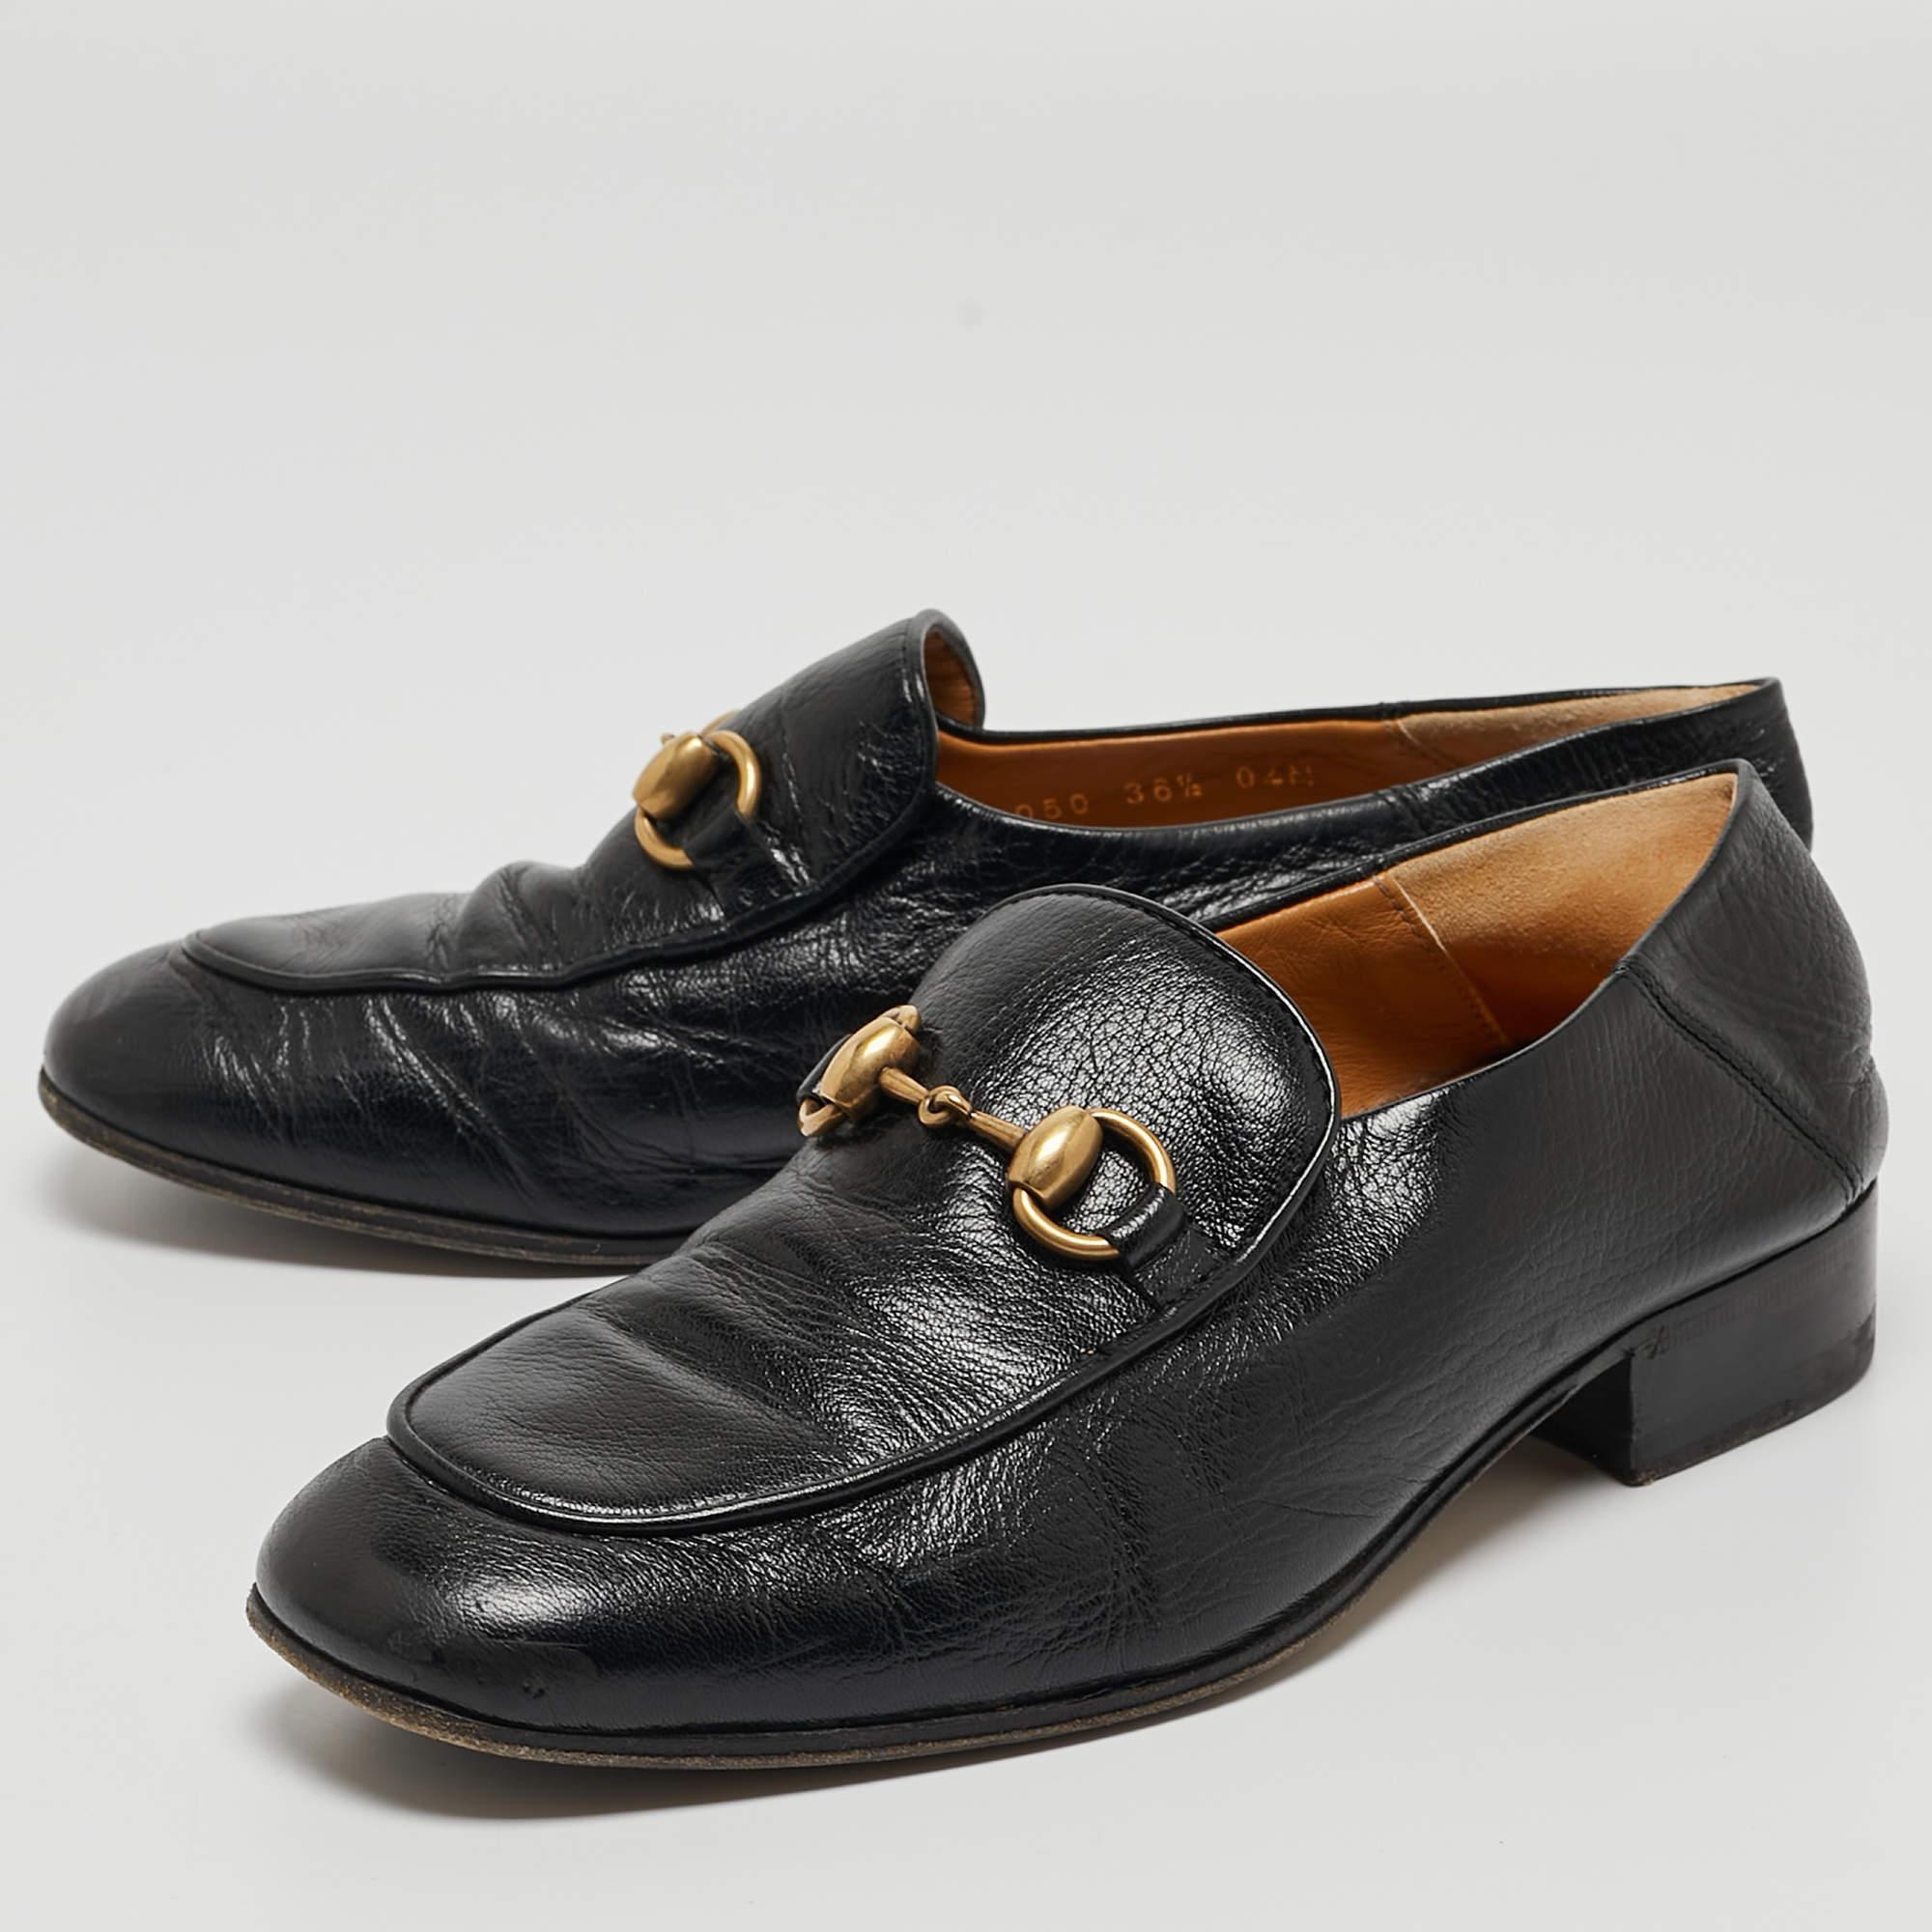 To perfectly complement your attires, we bring you this pair of Gucci Horsebit loafers that speak nothing but style. The shoes have been crafted with skill and are designed to be easy to slip on. They are just the right choice to complement your